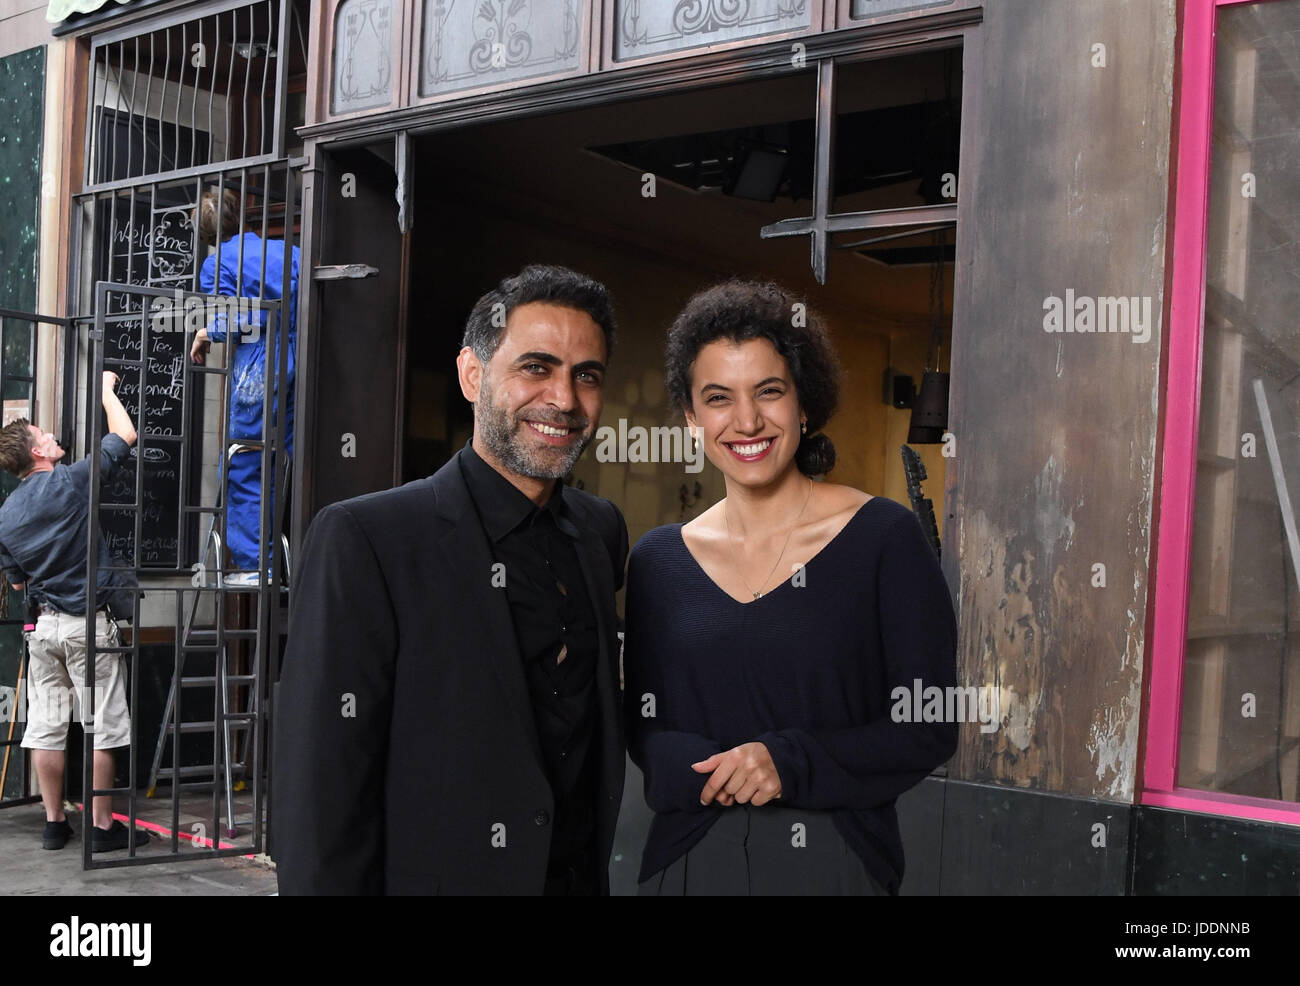 Cologne, Germany. 19th June, 2017. Actors Ali Daeem (Ahmed) and Zahraa Ghandour (Amal Jerjis) pose during a photo call at the shooting of the movie 'Baghdad in my shadow' on set in Cologne, Germany, 19 June 2017. The German-Swiss-British co-production is said to hit cinemas in the summer of 2018. - NO WIRE SERVICE - Photo: Horst Galuschka/dpa/Alamy Live News Stock Photo